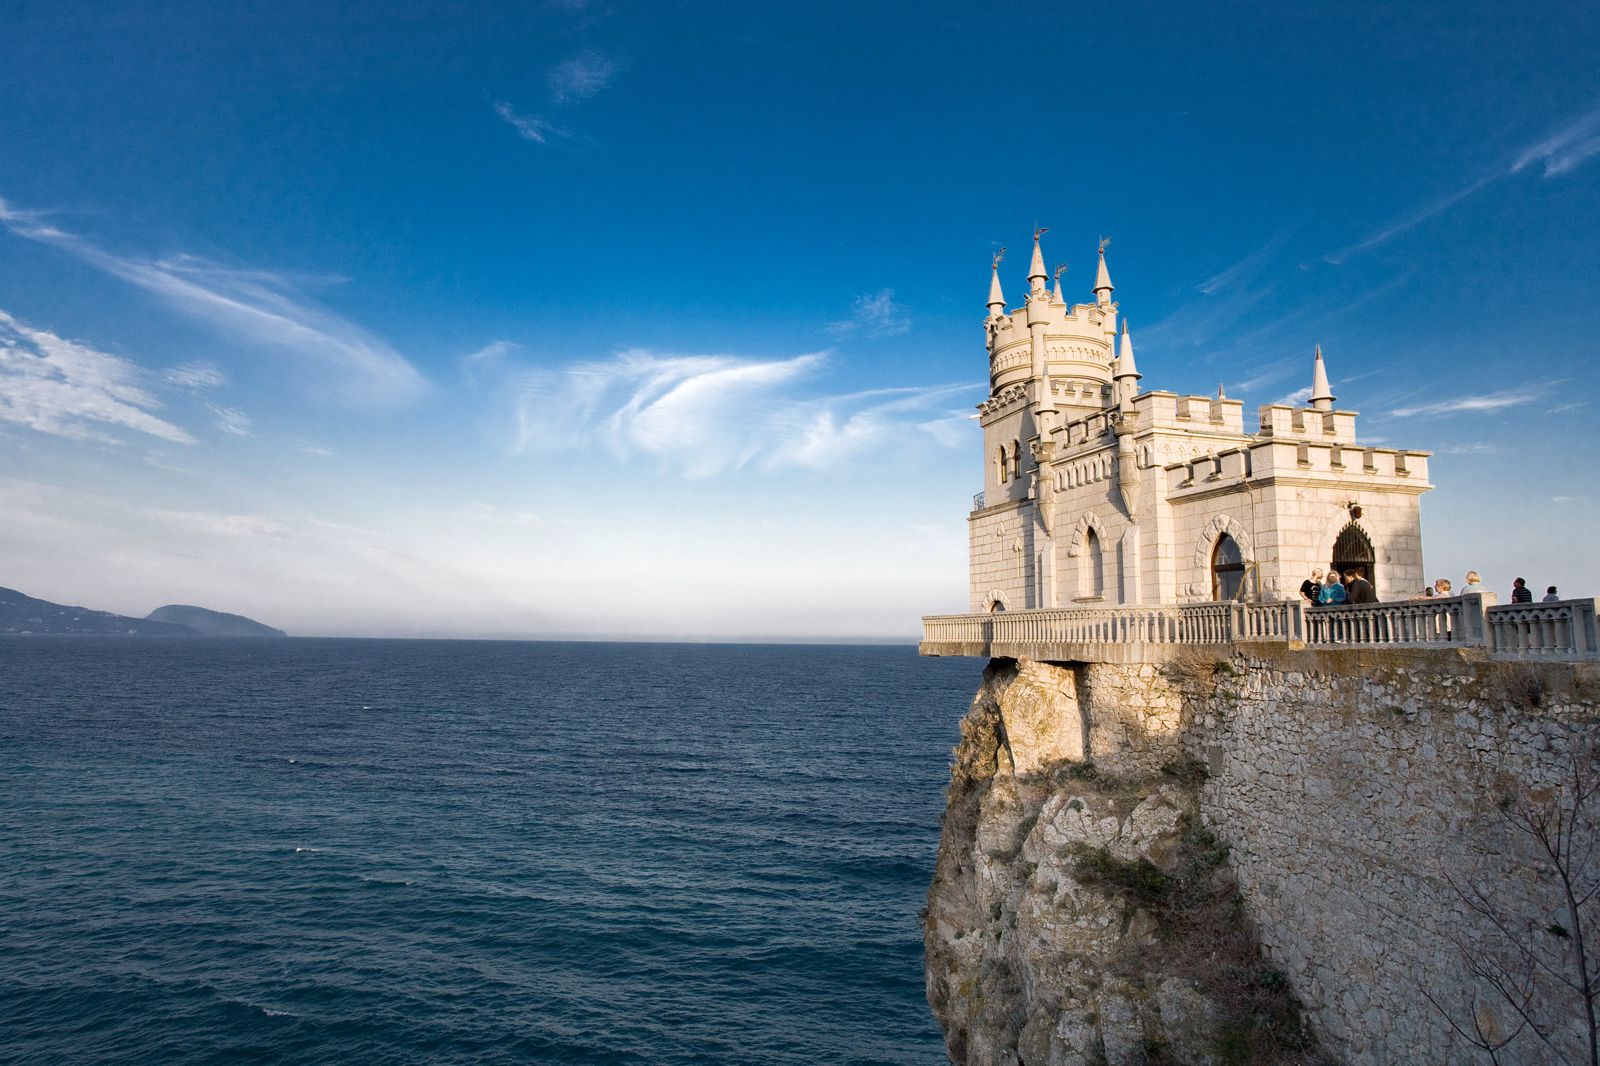 Nice Images Collection: Swallow's Nest Desktop Wallpapers